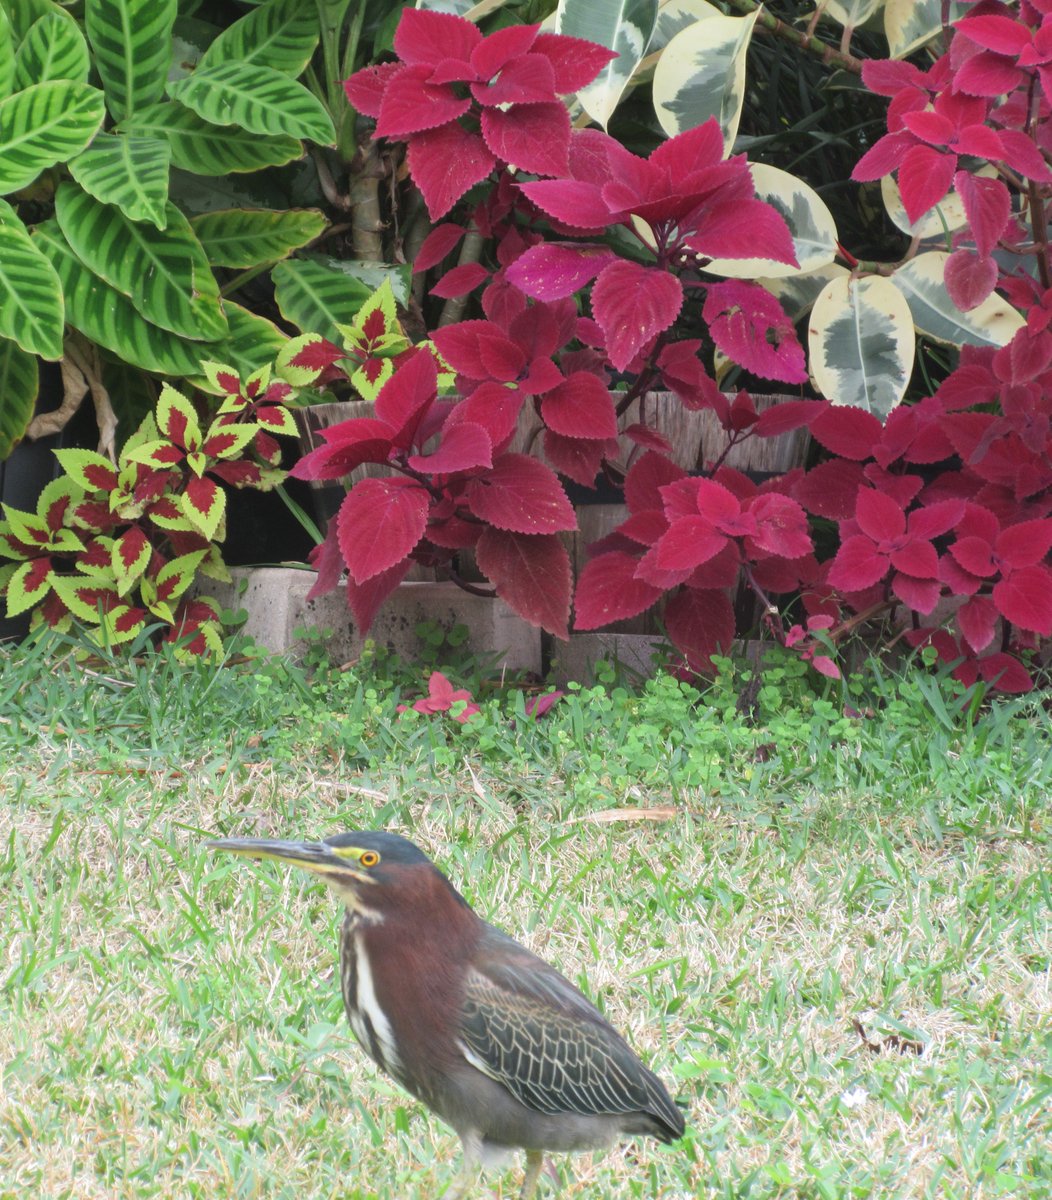 @kirola_hemant hard for me to get bird pics; they don't stay still  for me, but I ocassionally get a few of the wading birds , who are not scared off so easily.  will see if I can find one. PS  Remember #Fridayflowers tomorrow Attached is a Green Heron in my backyard